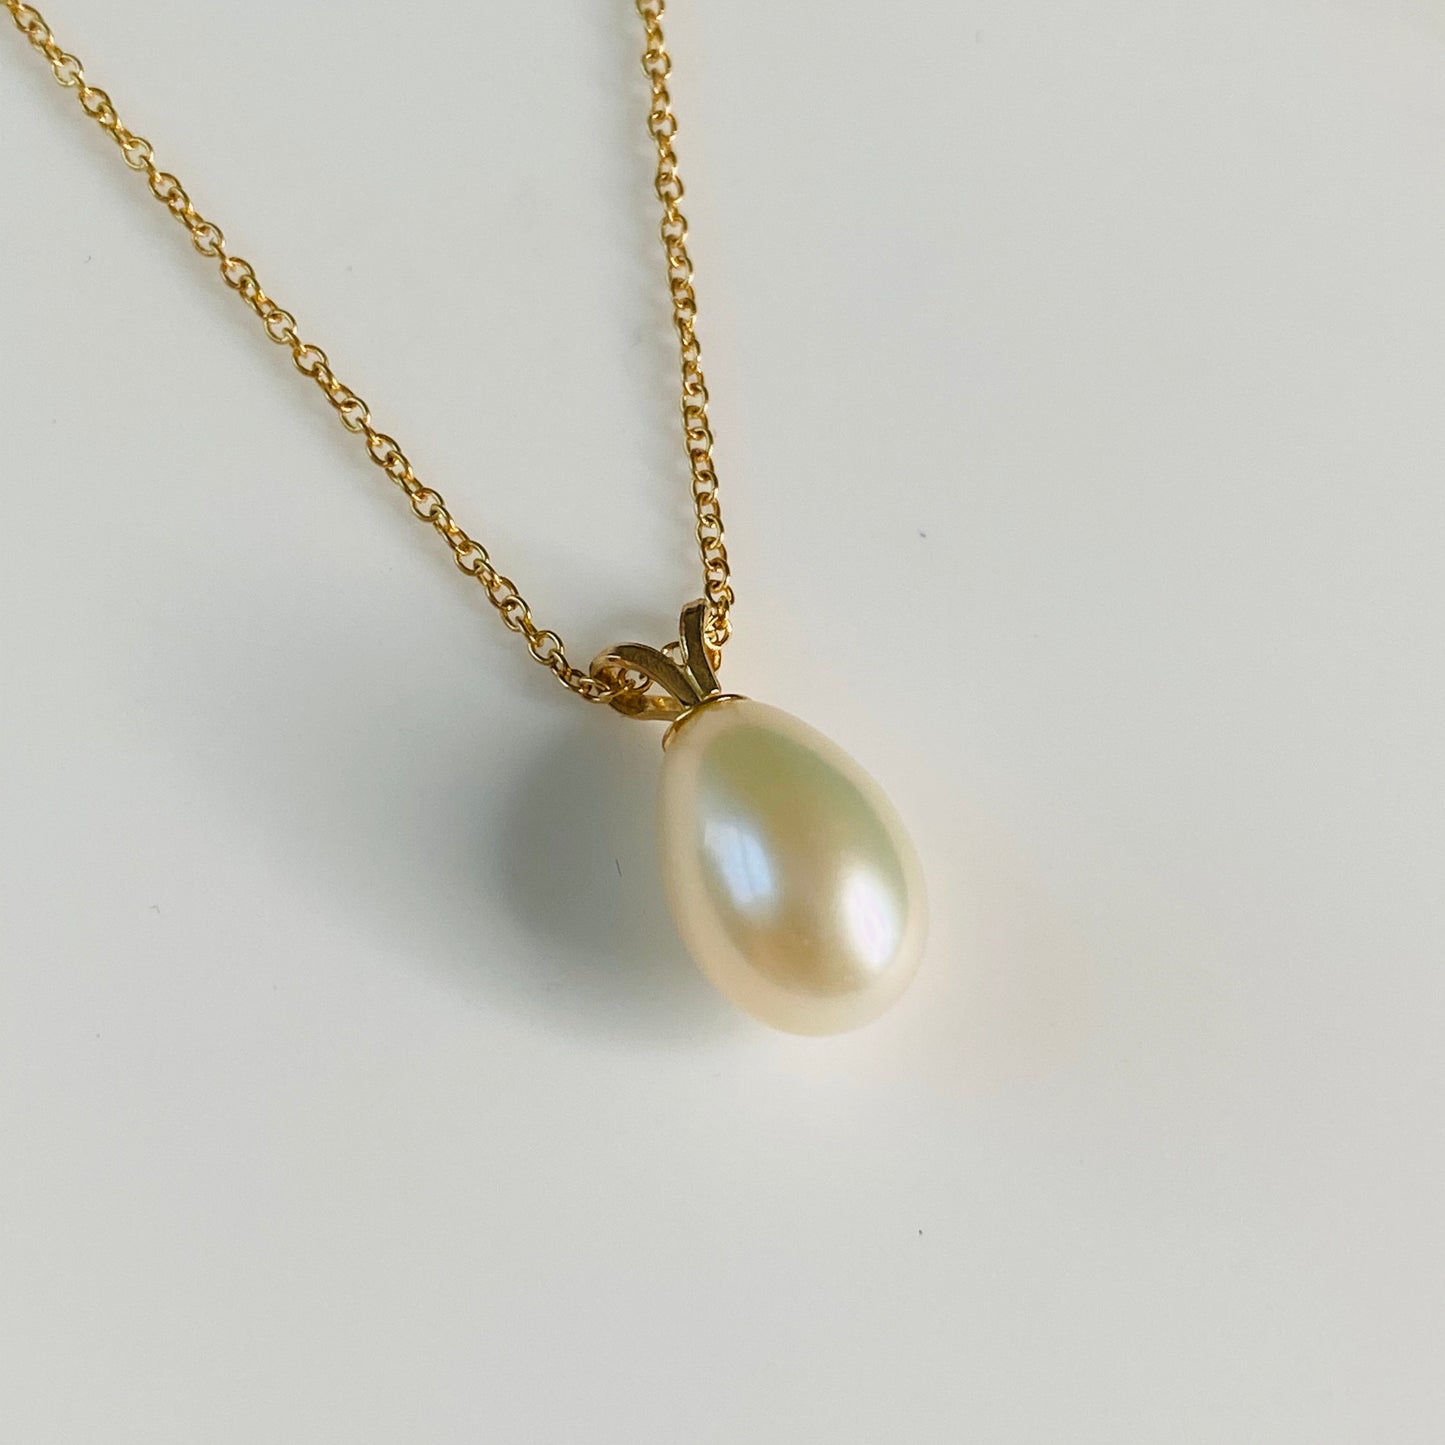 9ct Gold Pearl Pendant Necklace - John Ross Jewellers